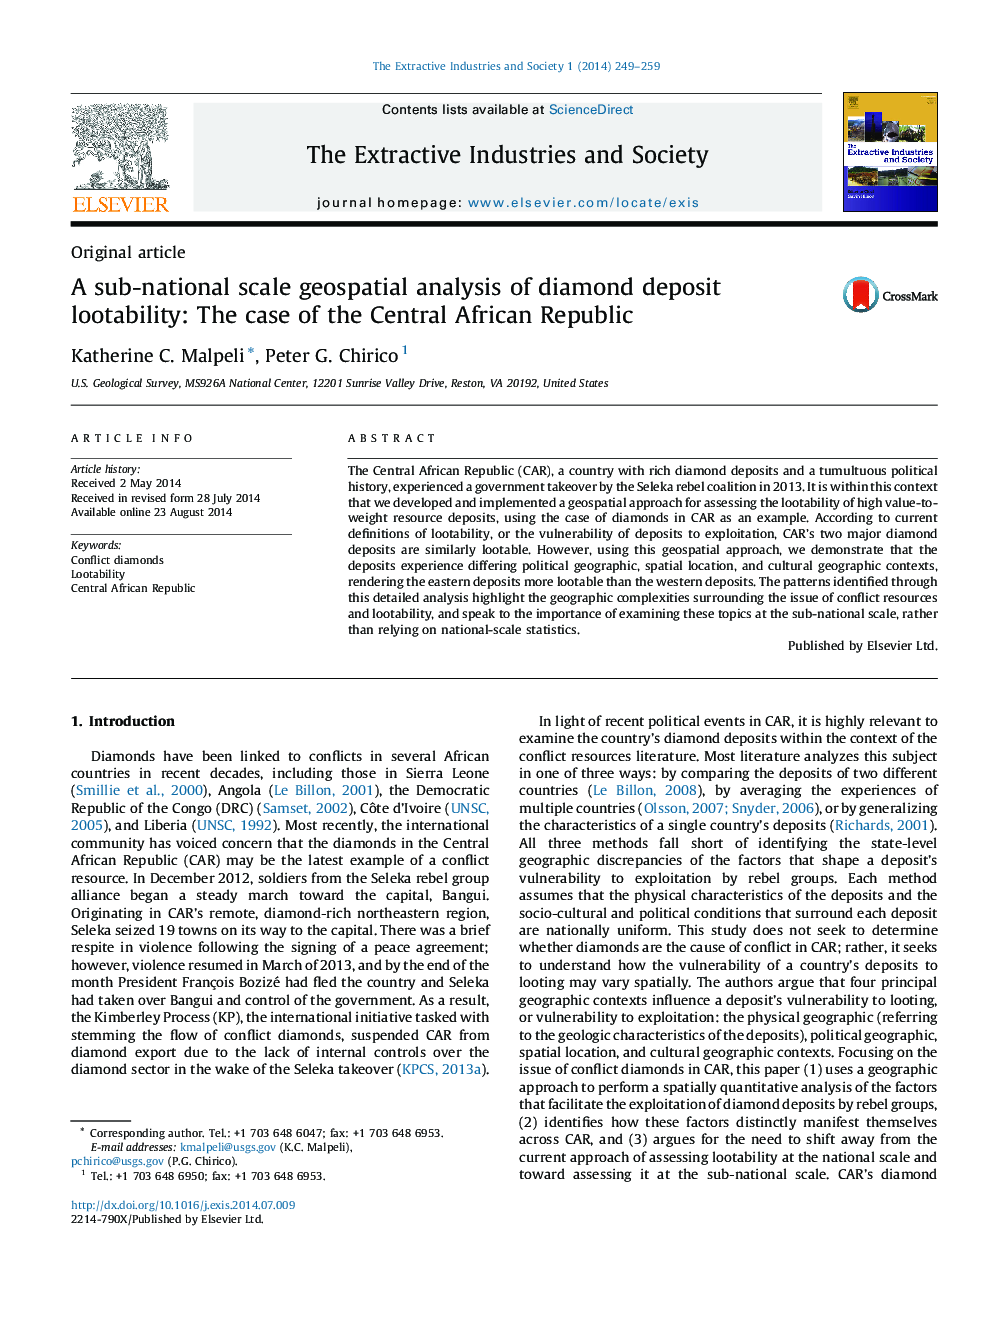 A sub-national scale geospatial analysis of diamond deposit lootability: The case of the Central African Republic